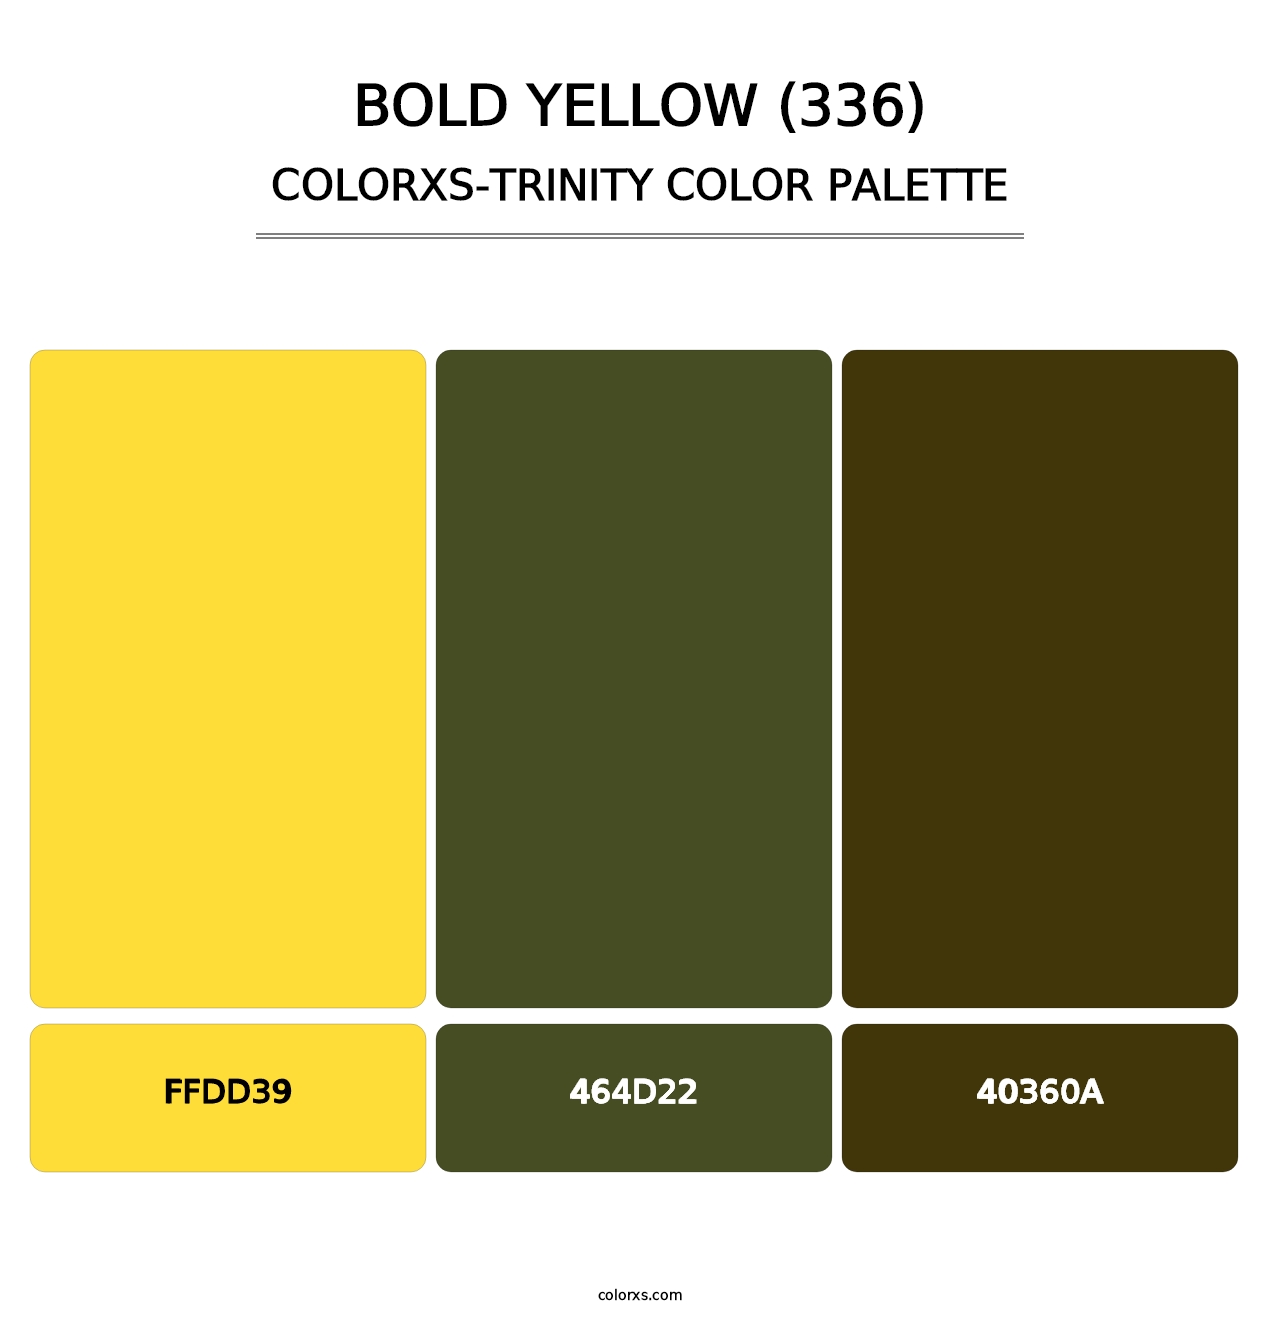 Bold Yellow (336) - Colorxs Trinity Palette